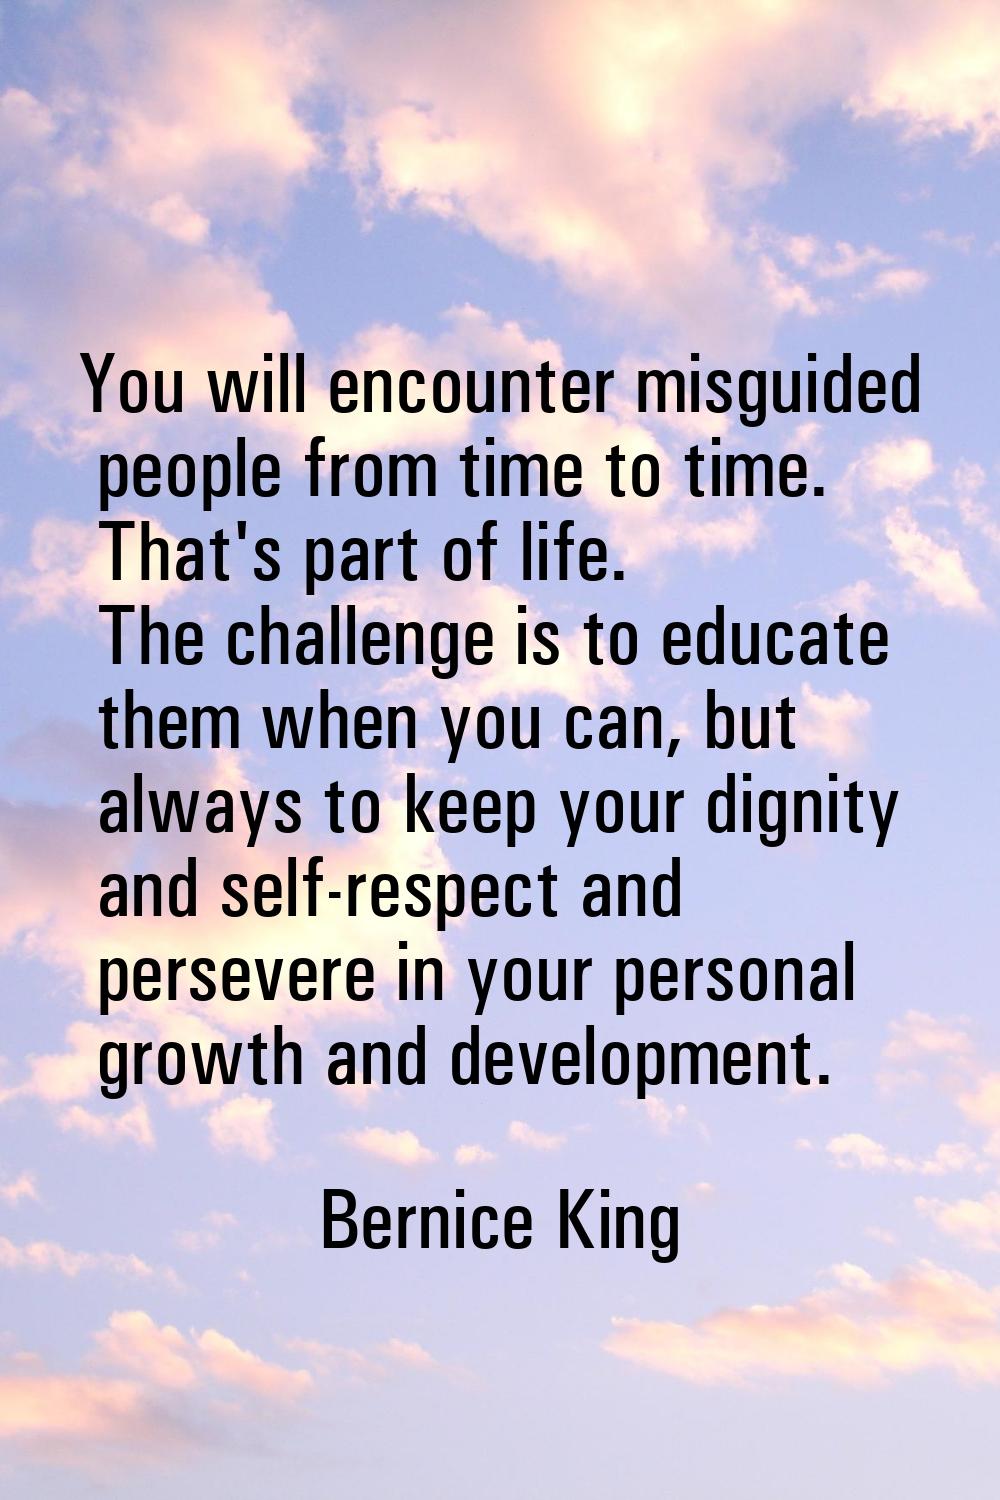 You will encounter misguided people from time to time. That's part of life. The challenge is to edu